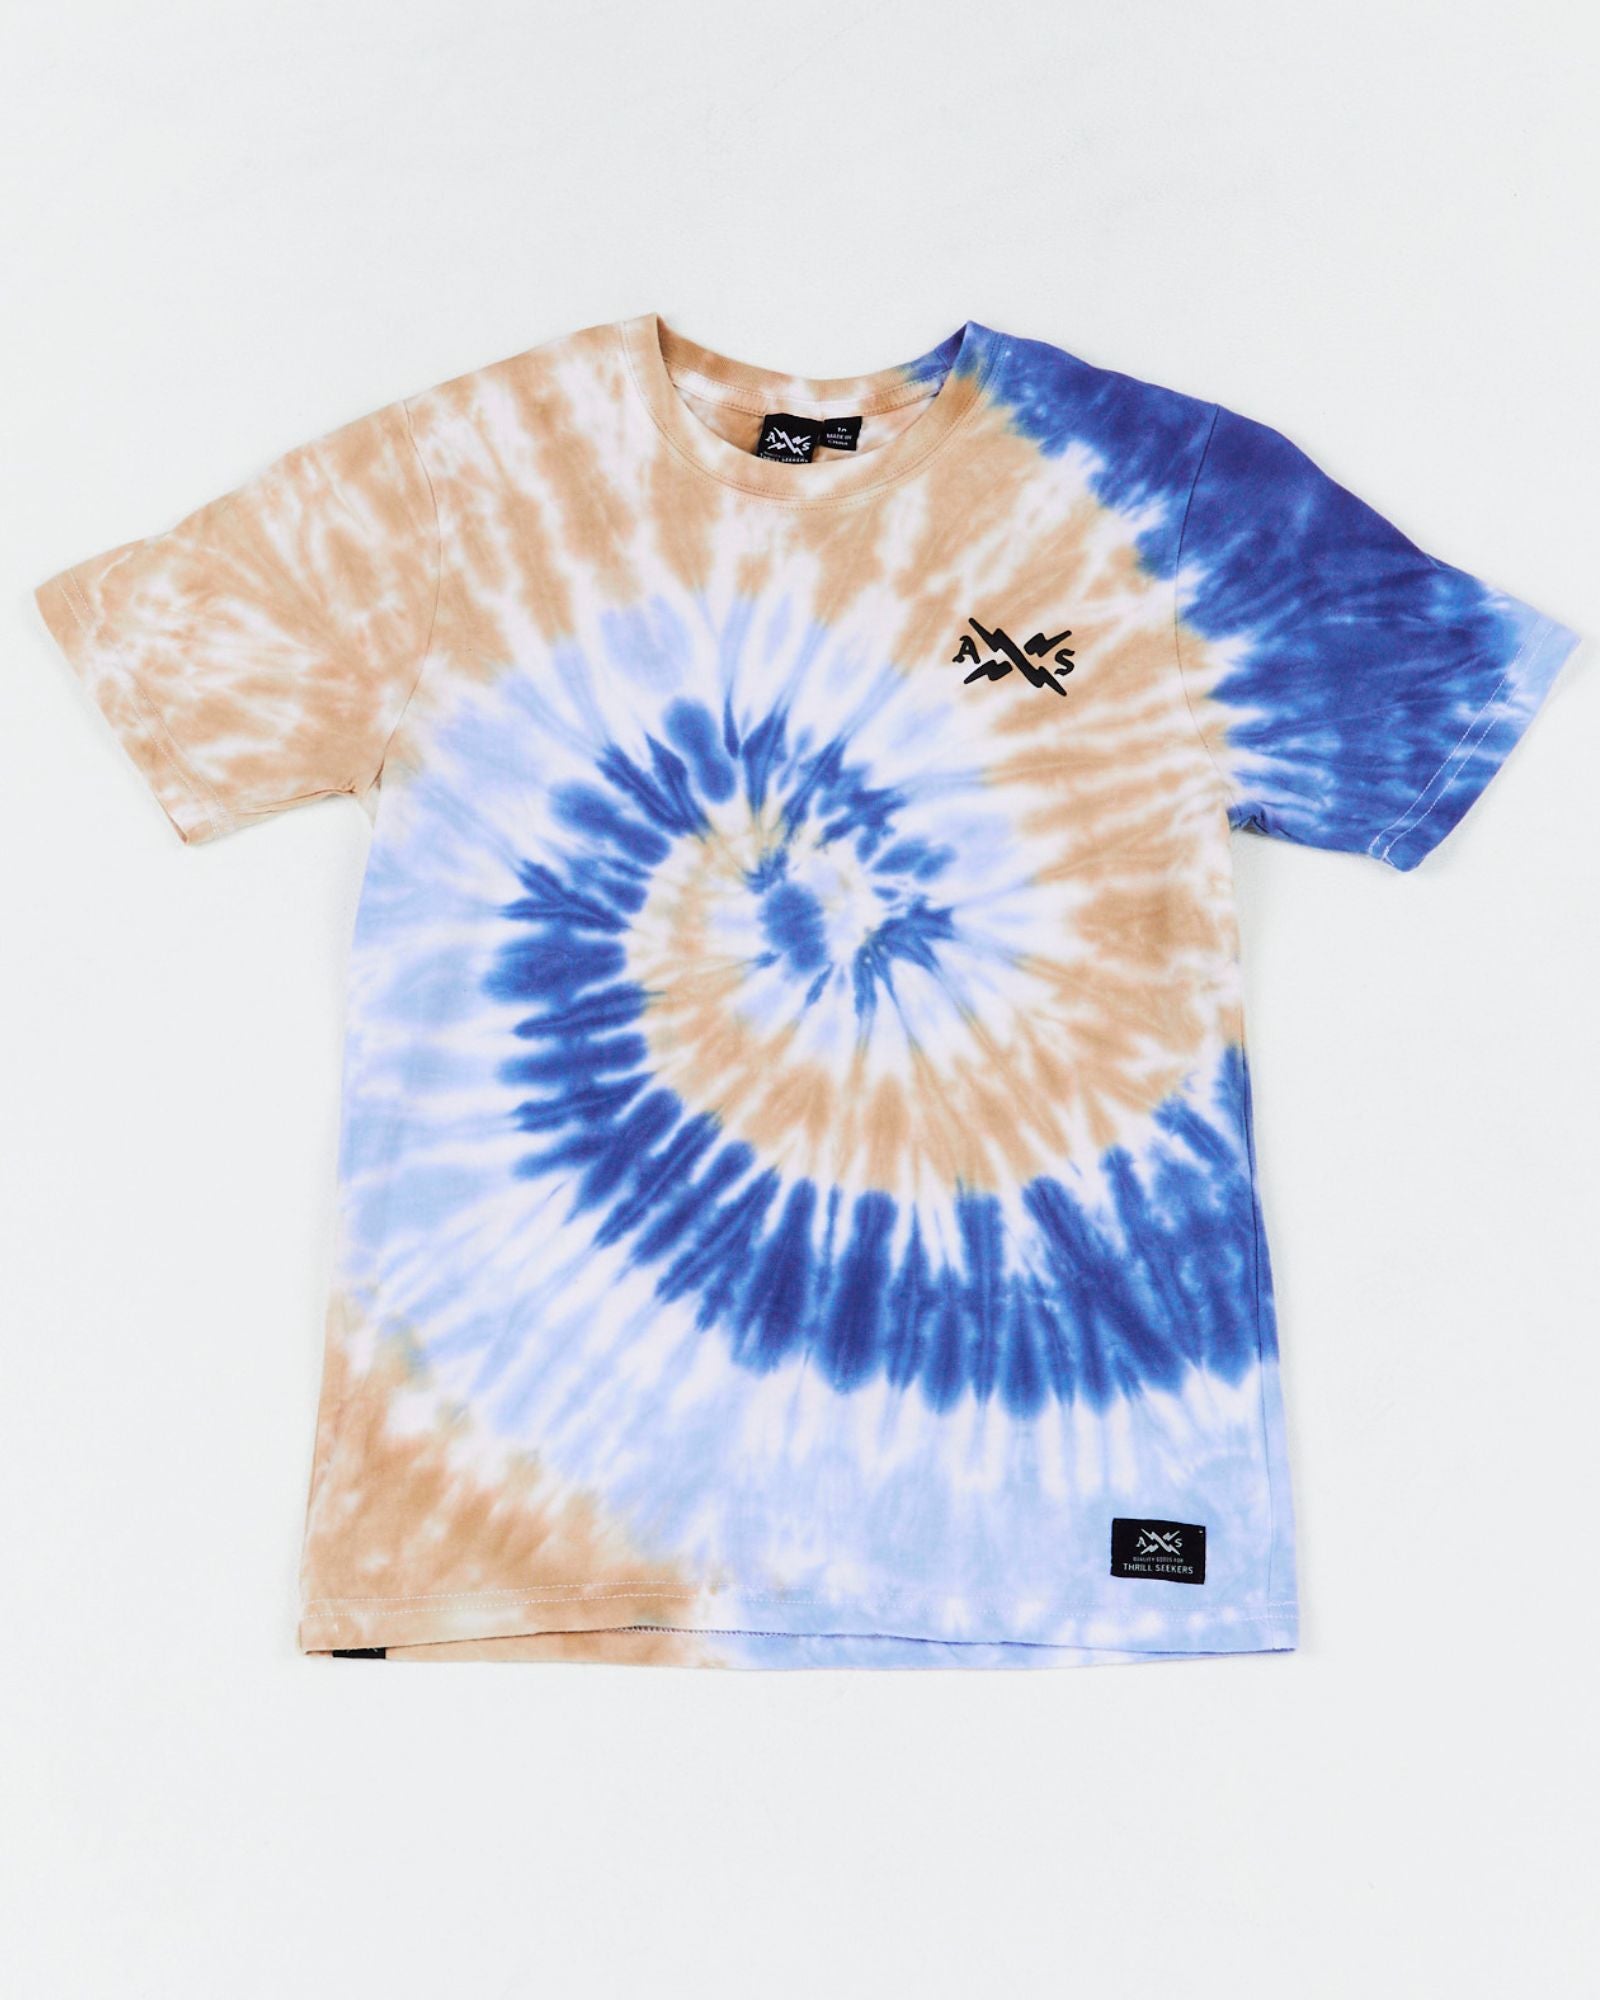 Alphabet Soup's Kids Dunked Tee for boys aged 2 to 7. Crafted in bright blue swirl tie dye & 100% cotton jersey for comfort. Features regular fit, straight hemline, short sleeves, ribbed crew neckline & puff print on chest. 